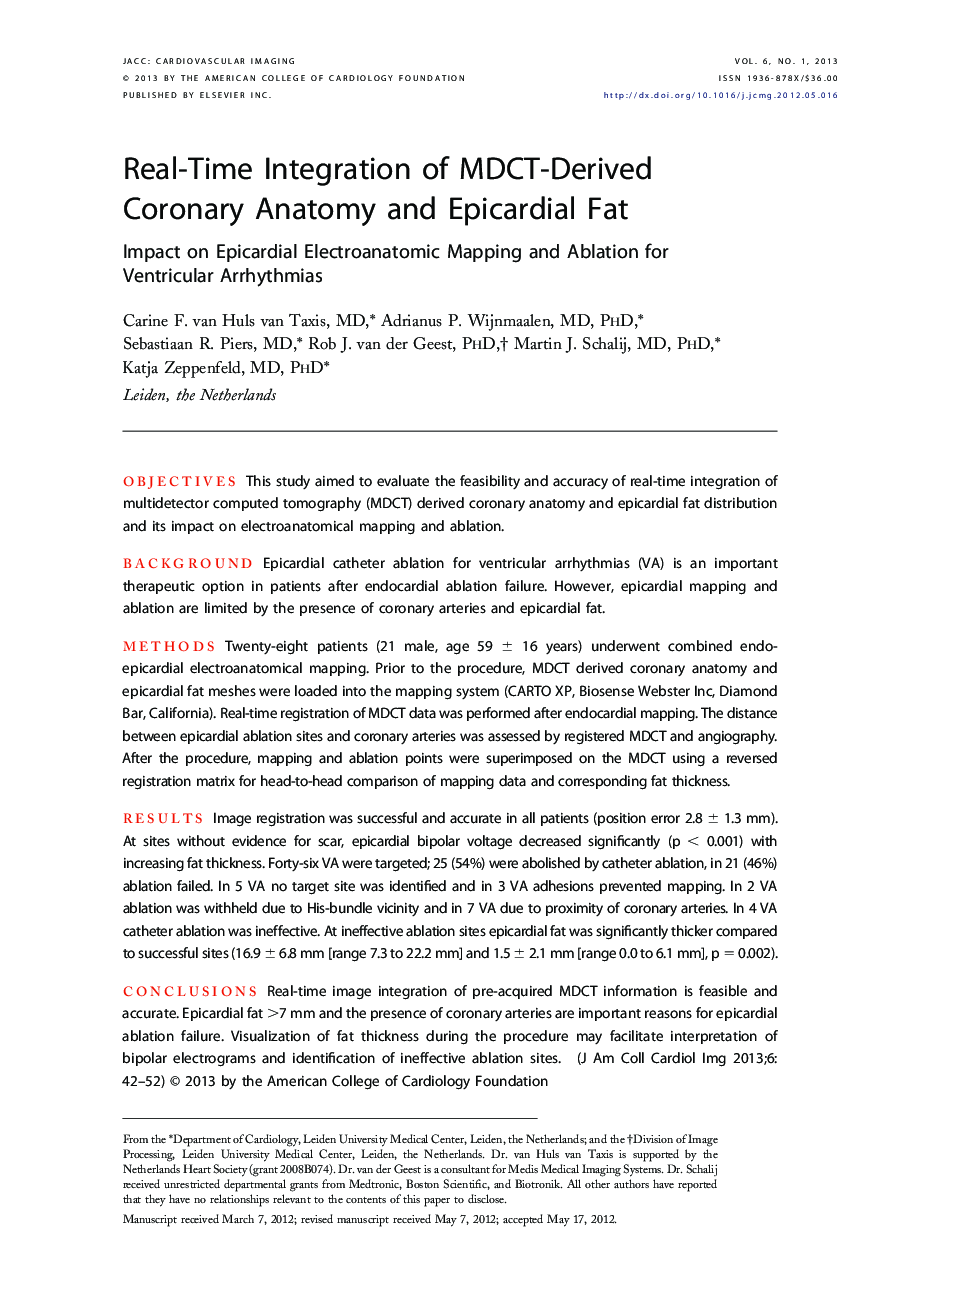 Real-Time Integration of MDCT-Derived Coronary Anatomy and Epicardial Fat : Impact on Epicardial Electroanatomic Mapping and Ablation for Ventricular Arrhythmias